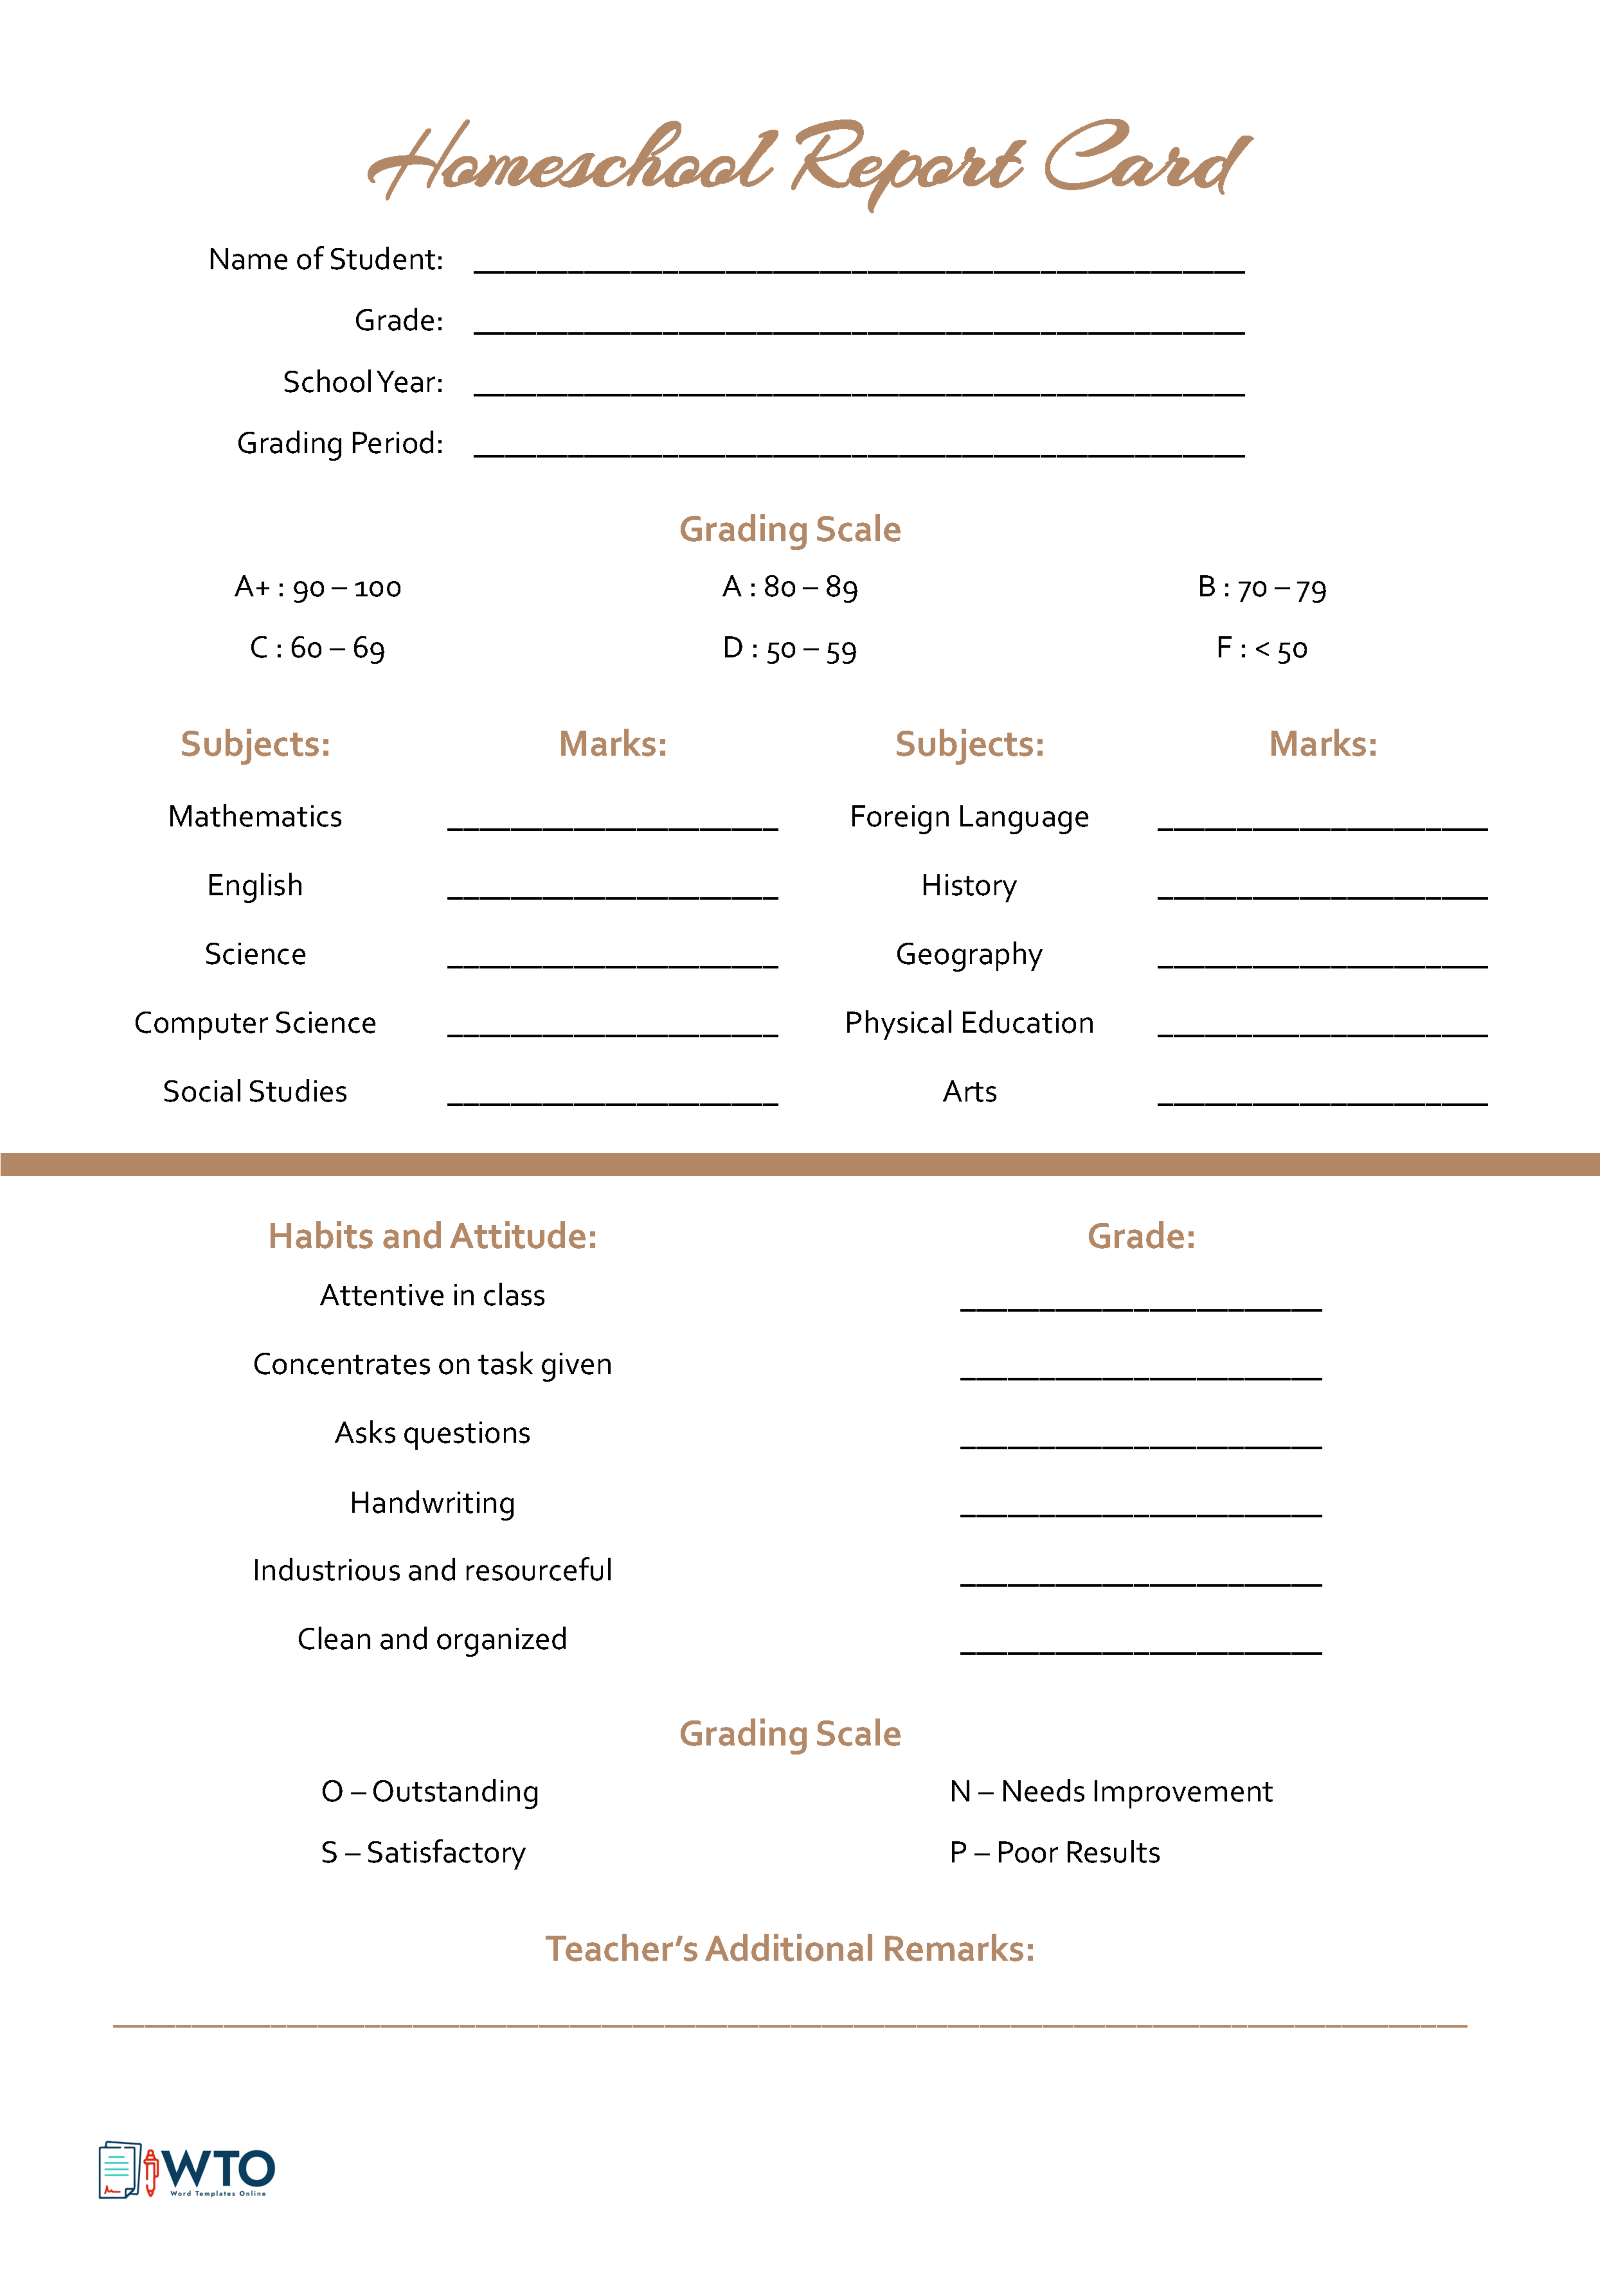 Customizable Report Card Template for Homeschooling